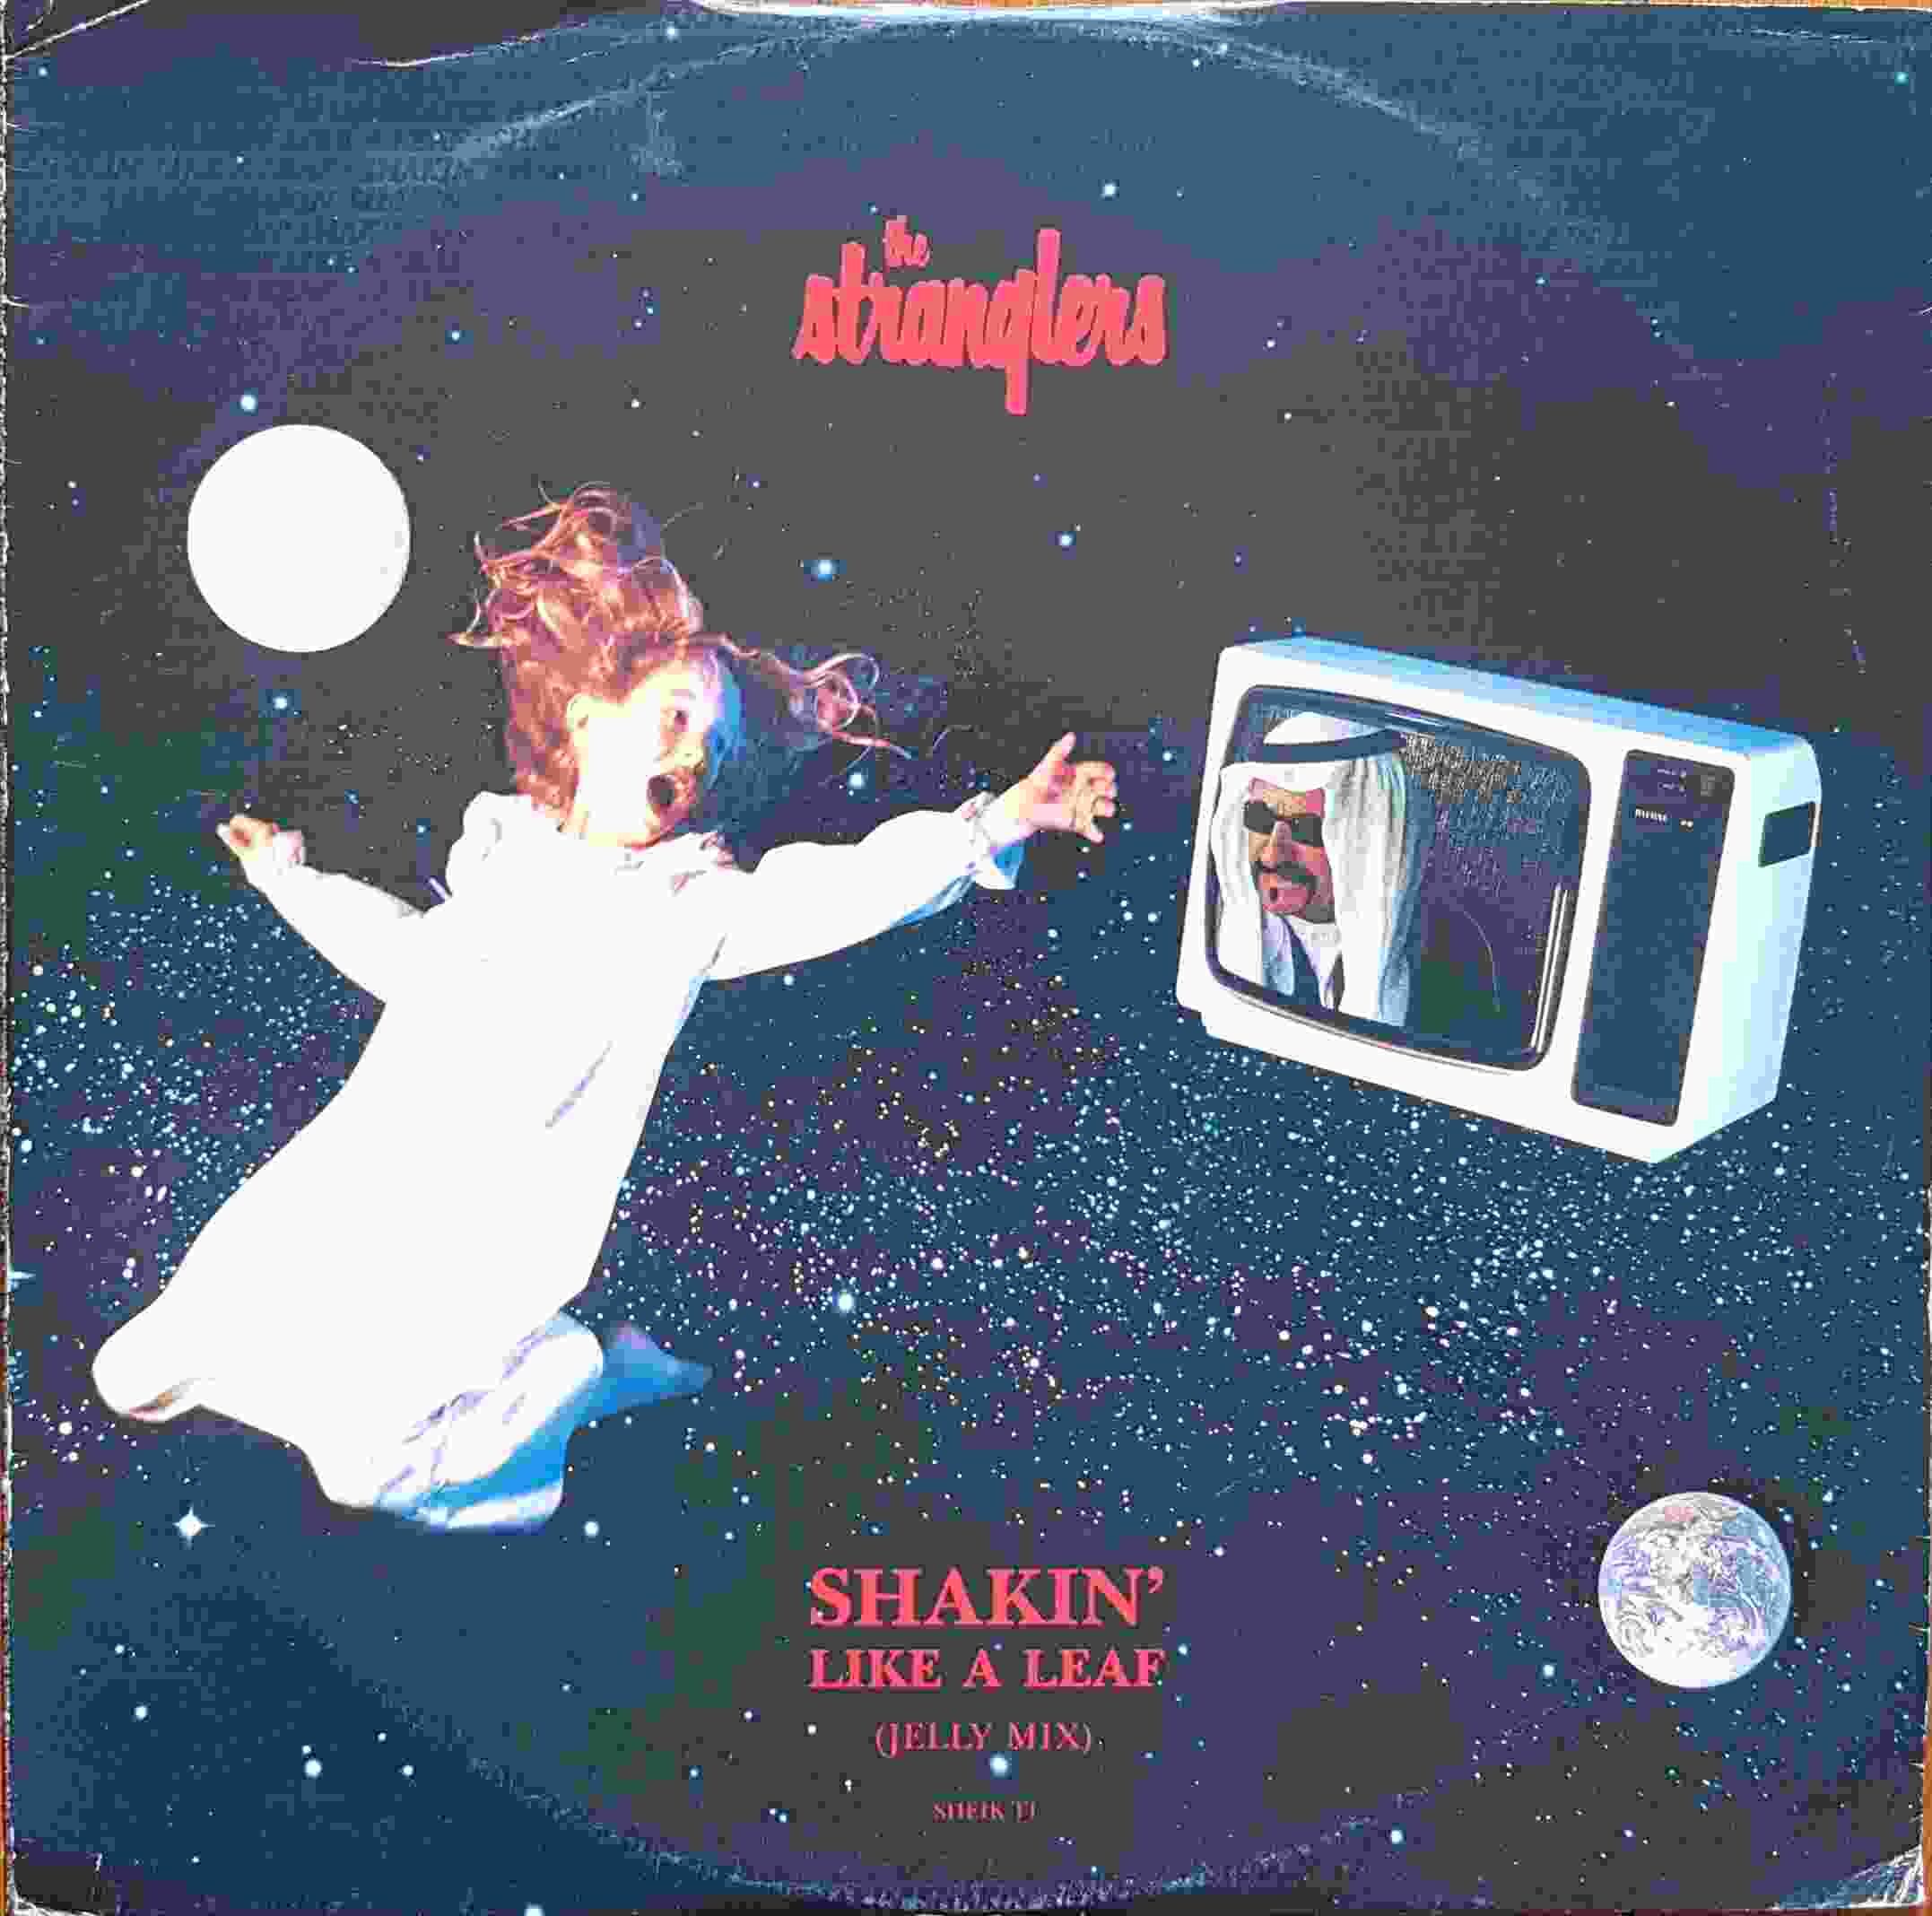 Picture of SHEIK T 1 Shakin' like a leaf by artist The Stranglers